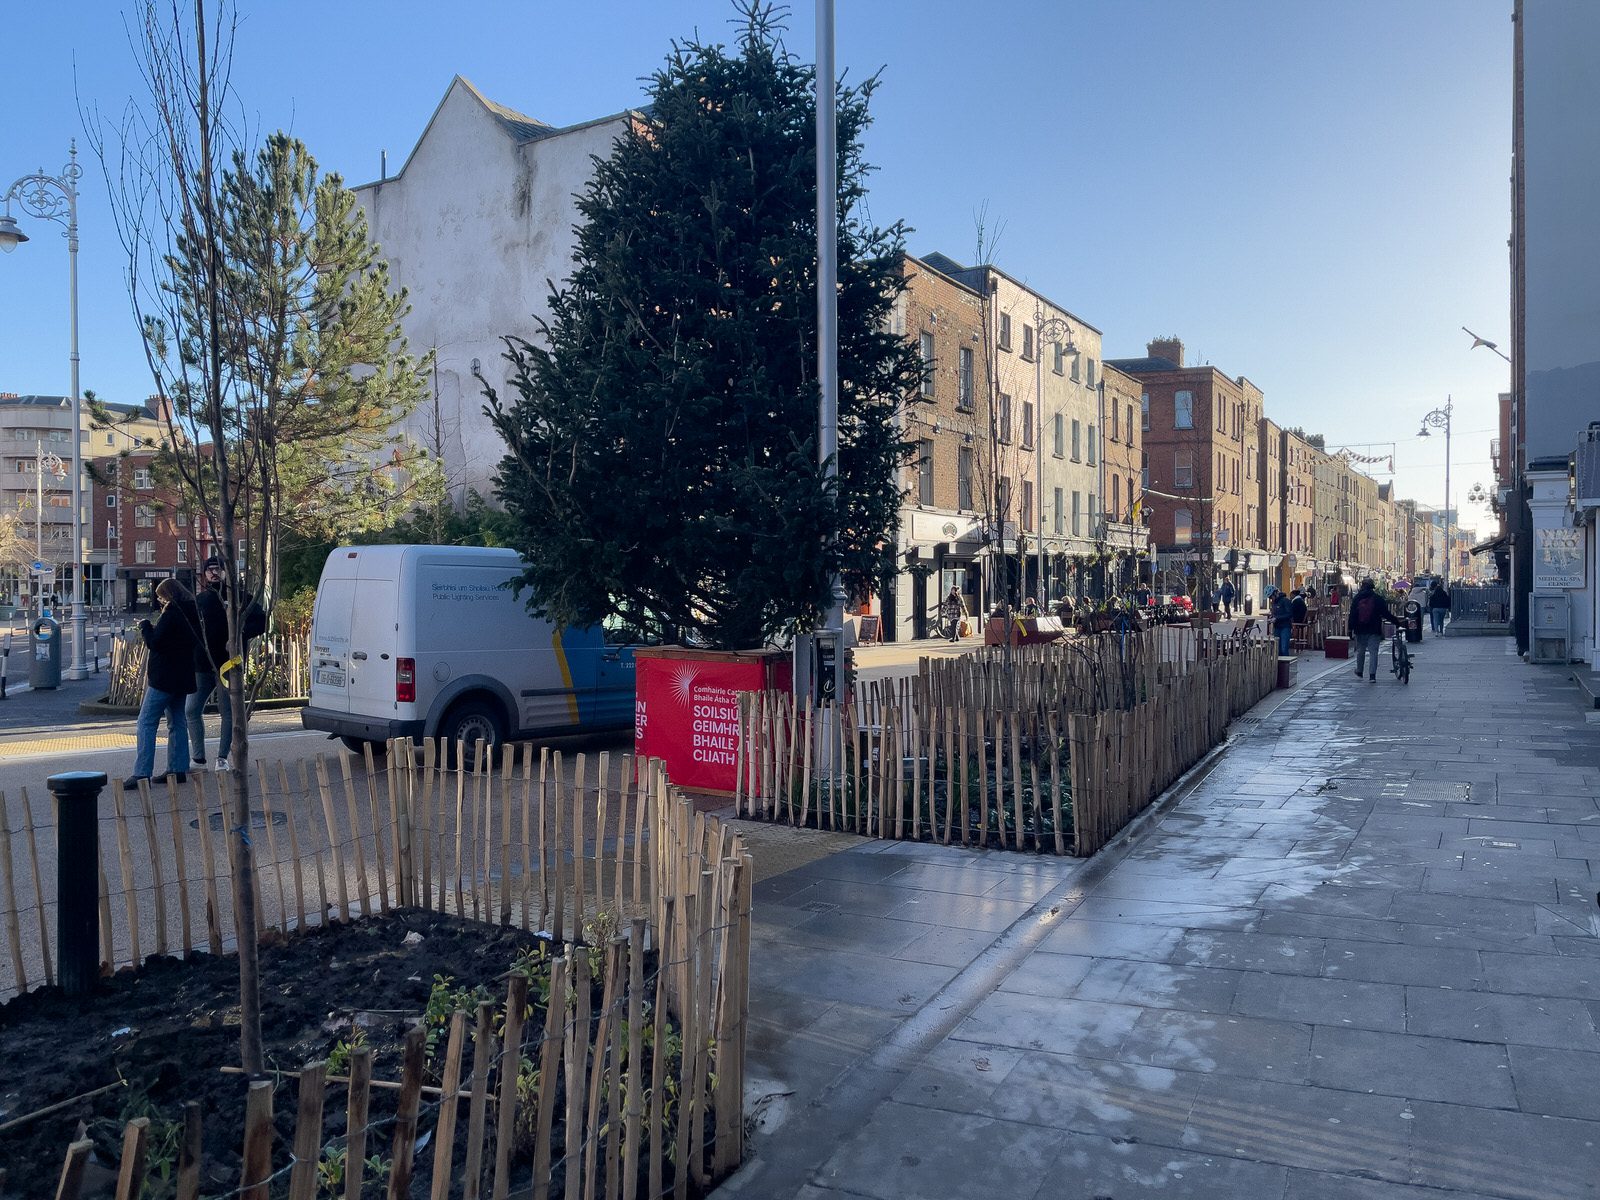 THE NEW STREET FURNITURE AND THE CHRISTMAS TREE [HAVE ARRIVED IN CAPEL STREET]-225843-1